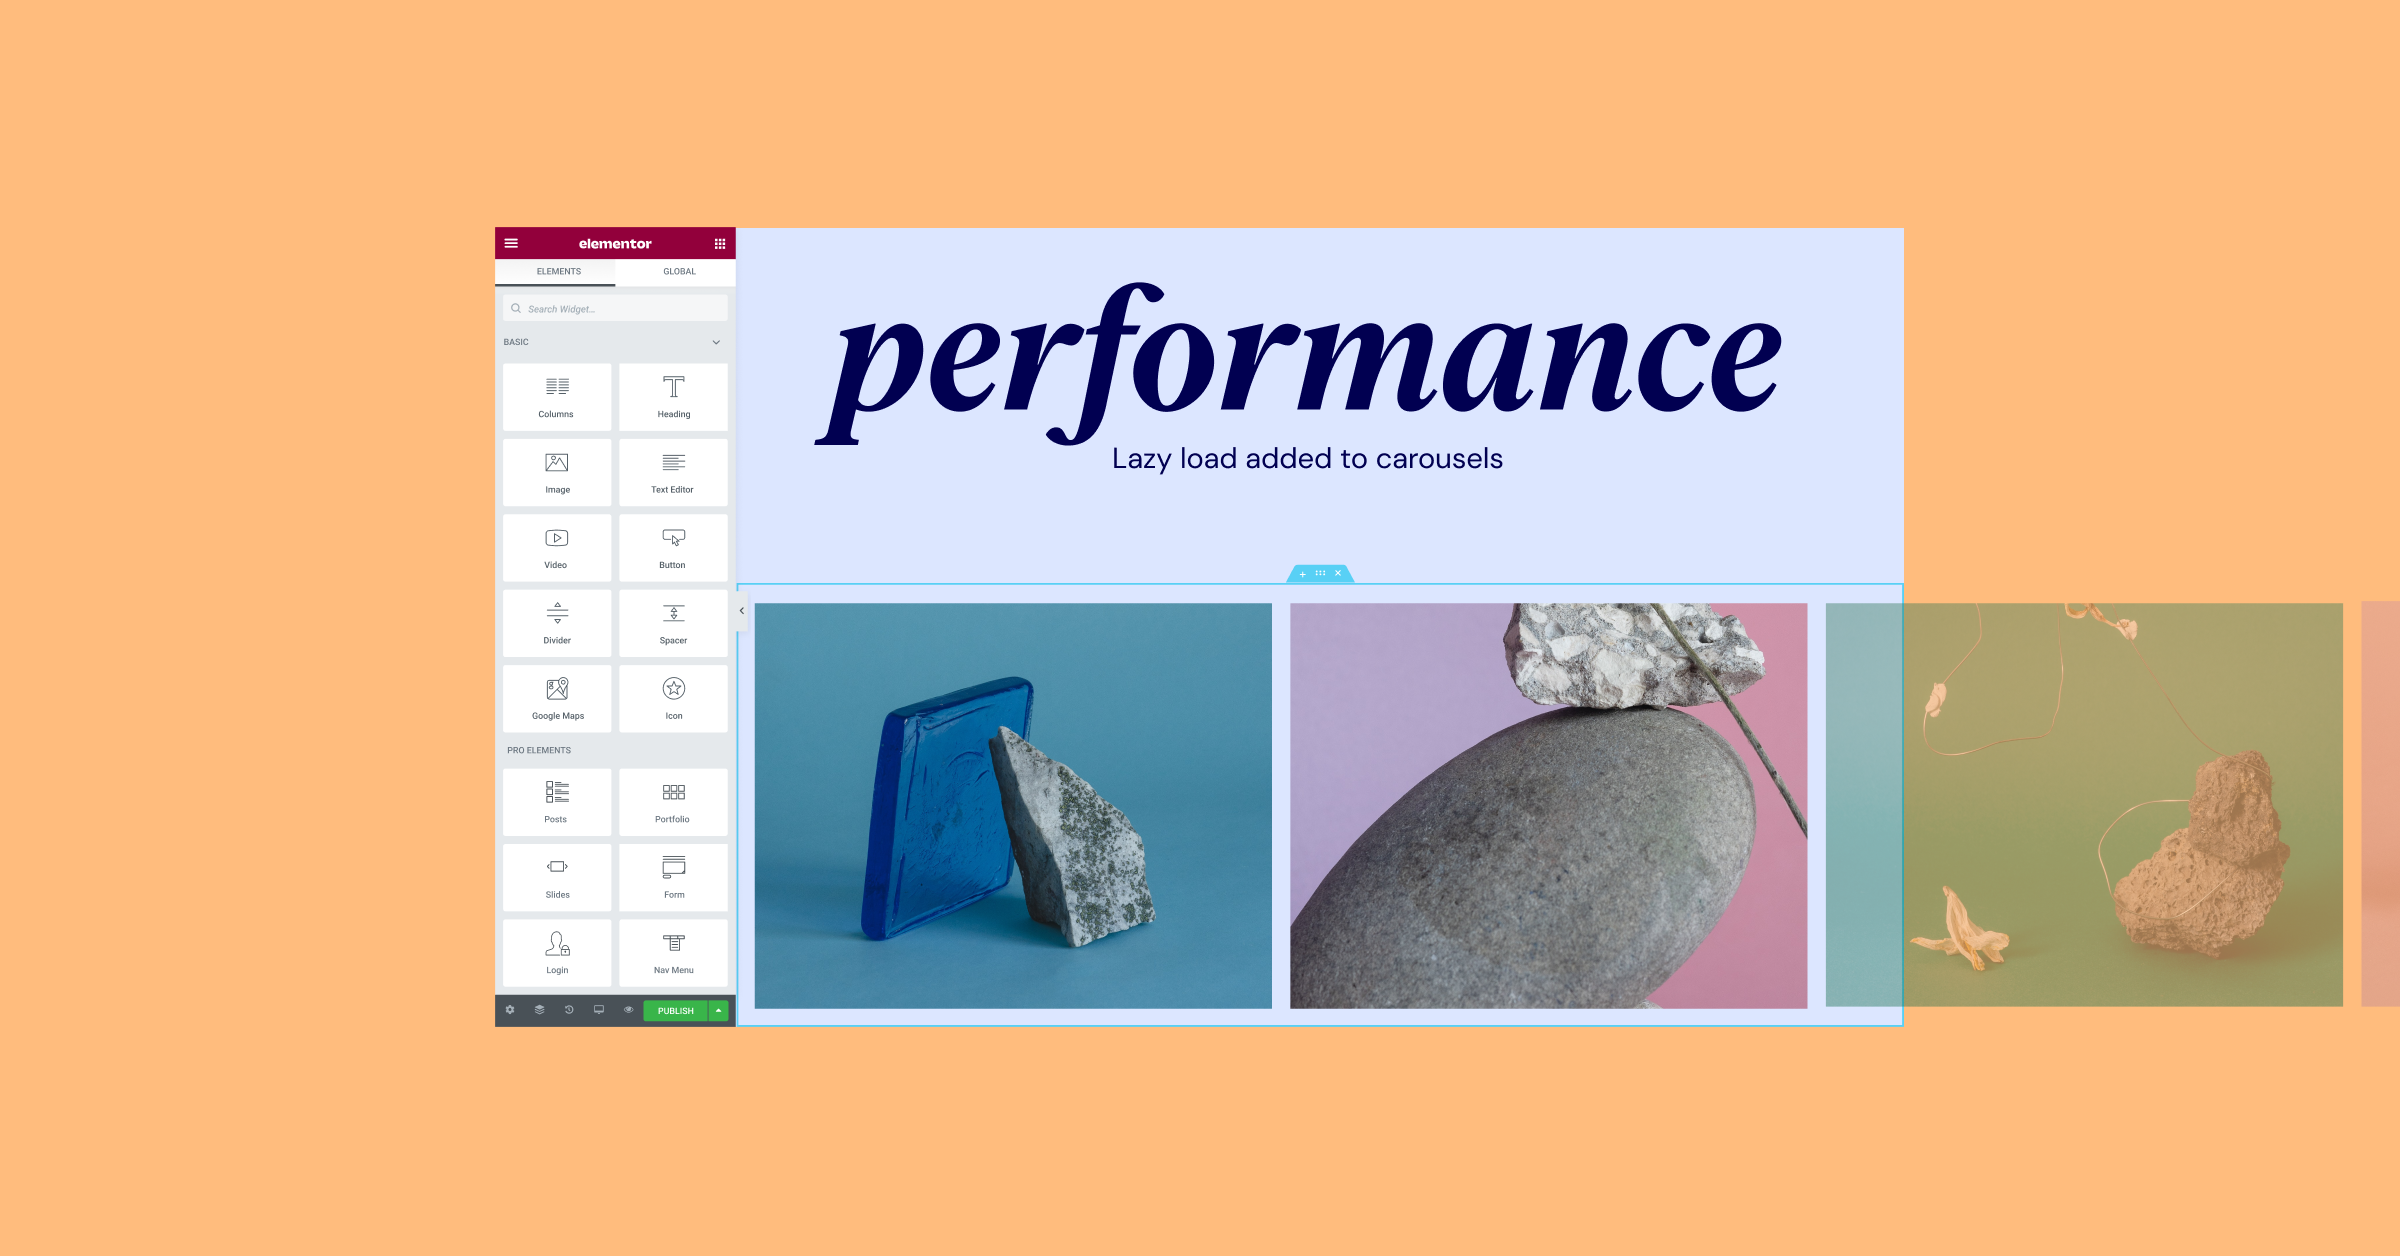 Pereformance Improvement Lazy Load Carusel More From Elementor 3.6 — Enhanced Import/Export And Rearrange Global Fonts And Colors 3